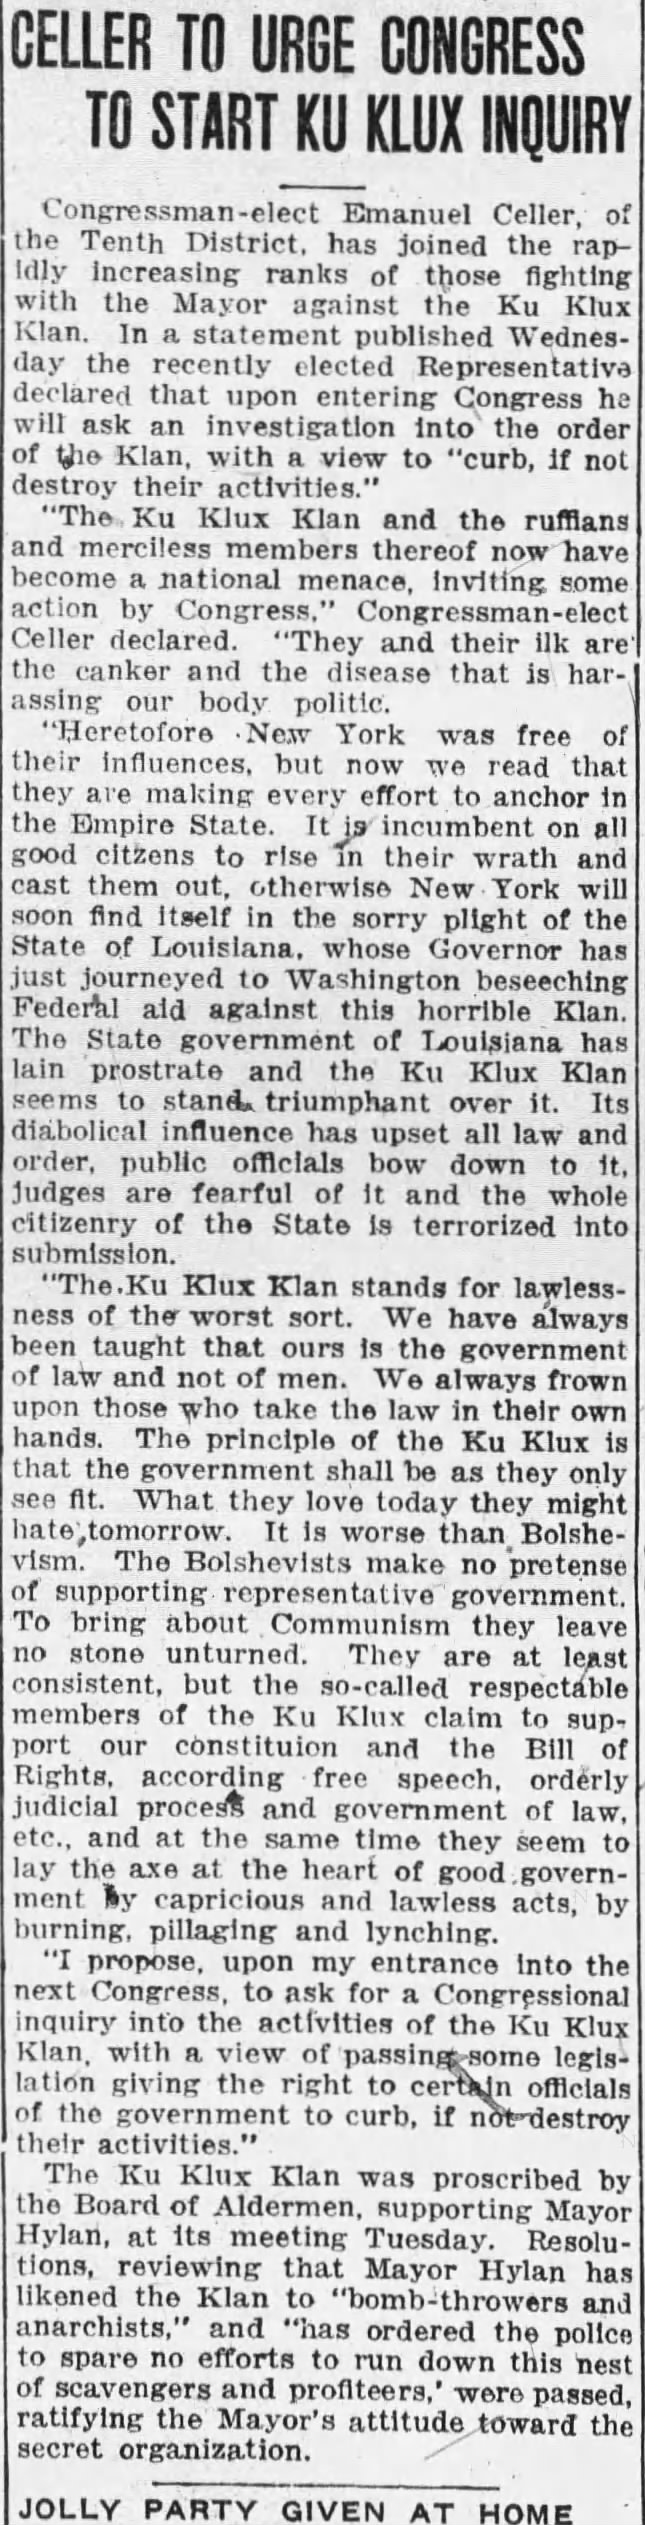 "Celler to Urge Congress to Start Ku Klux Inquiry," The Chat (Brooklyn, NY), December 2, 1922,10